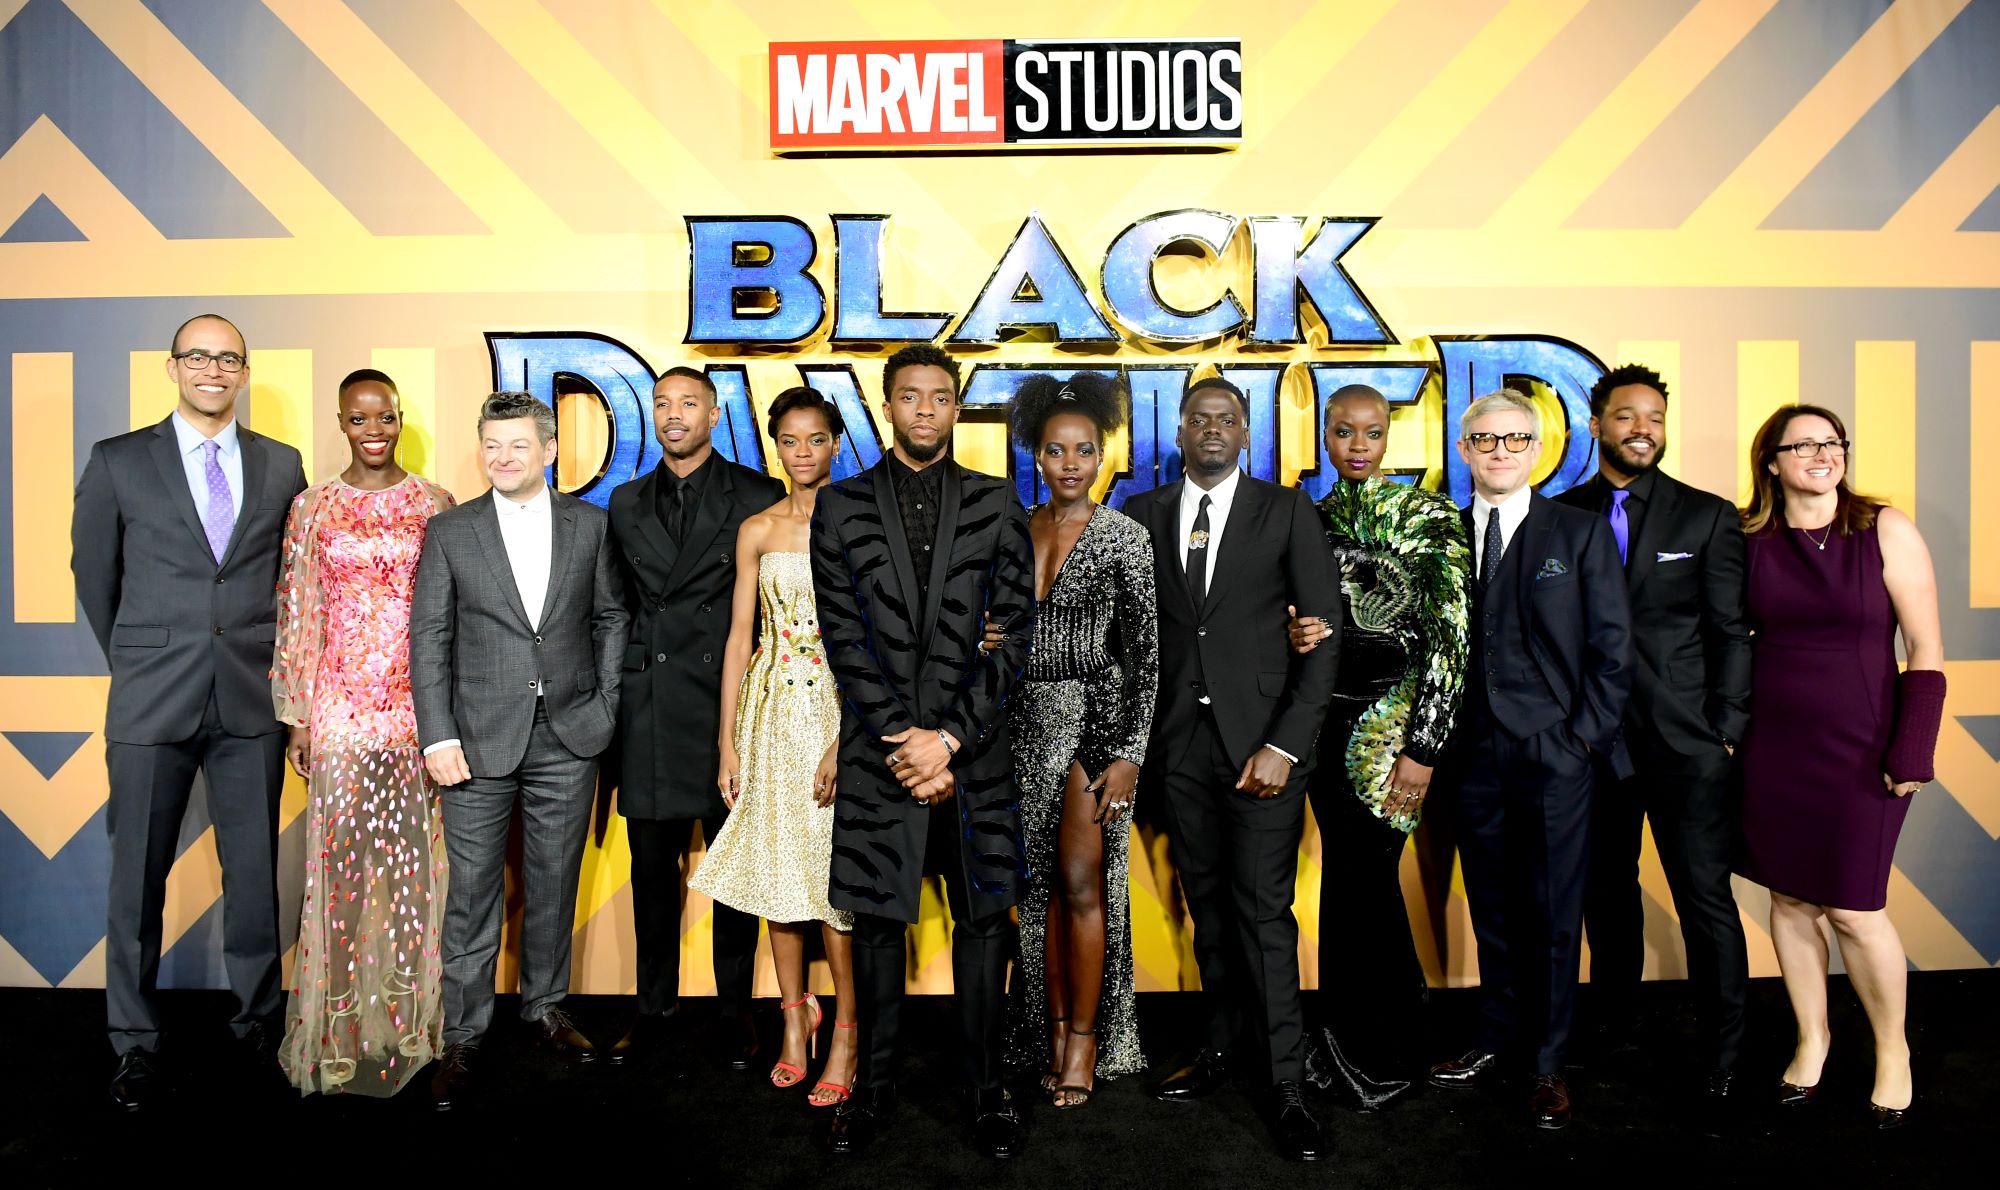 The 'Black Panther' cast, who all won't return for the sequel, pose with the crew on the red carpet at the premiere.